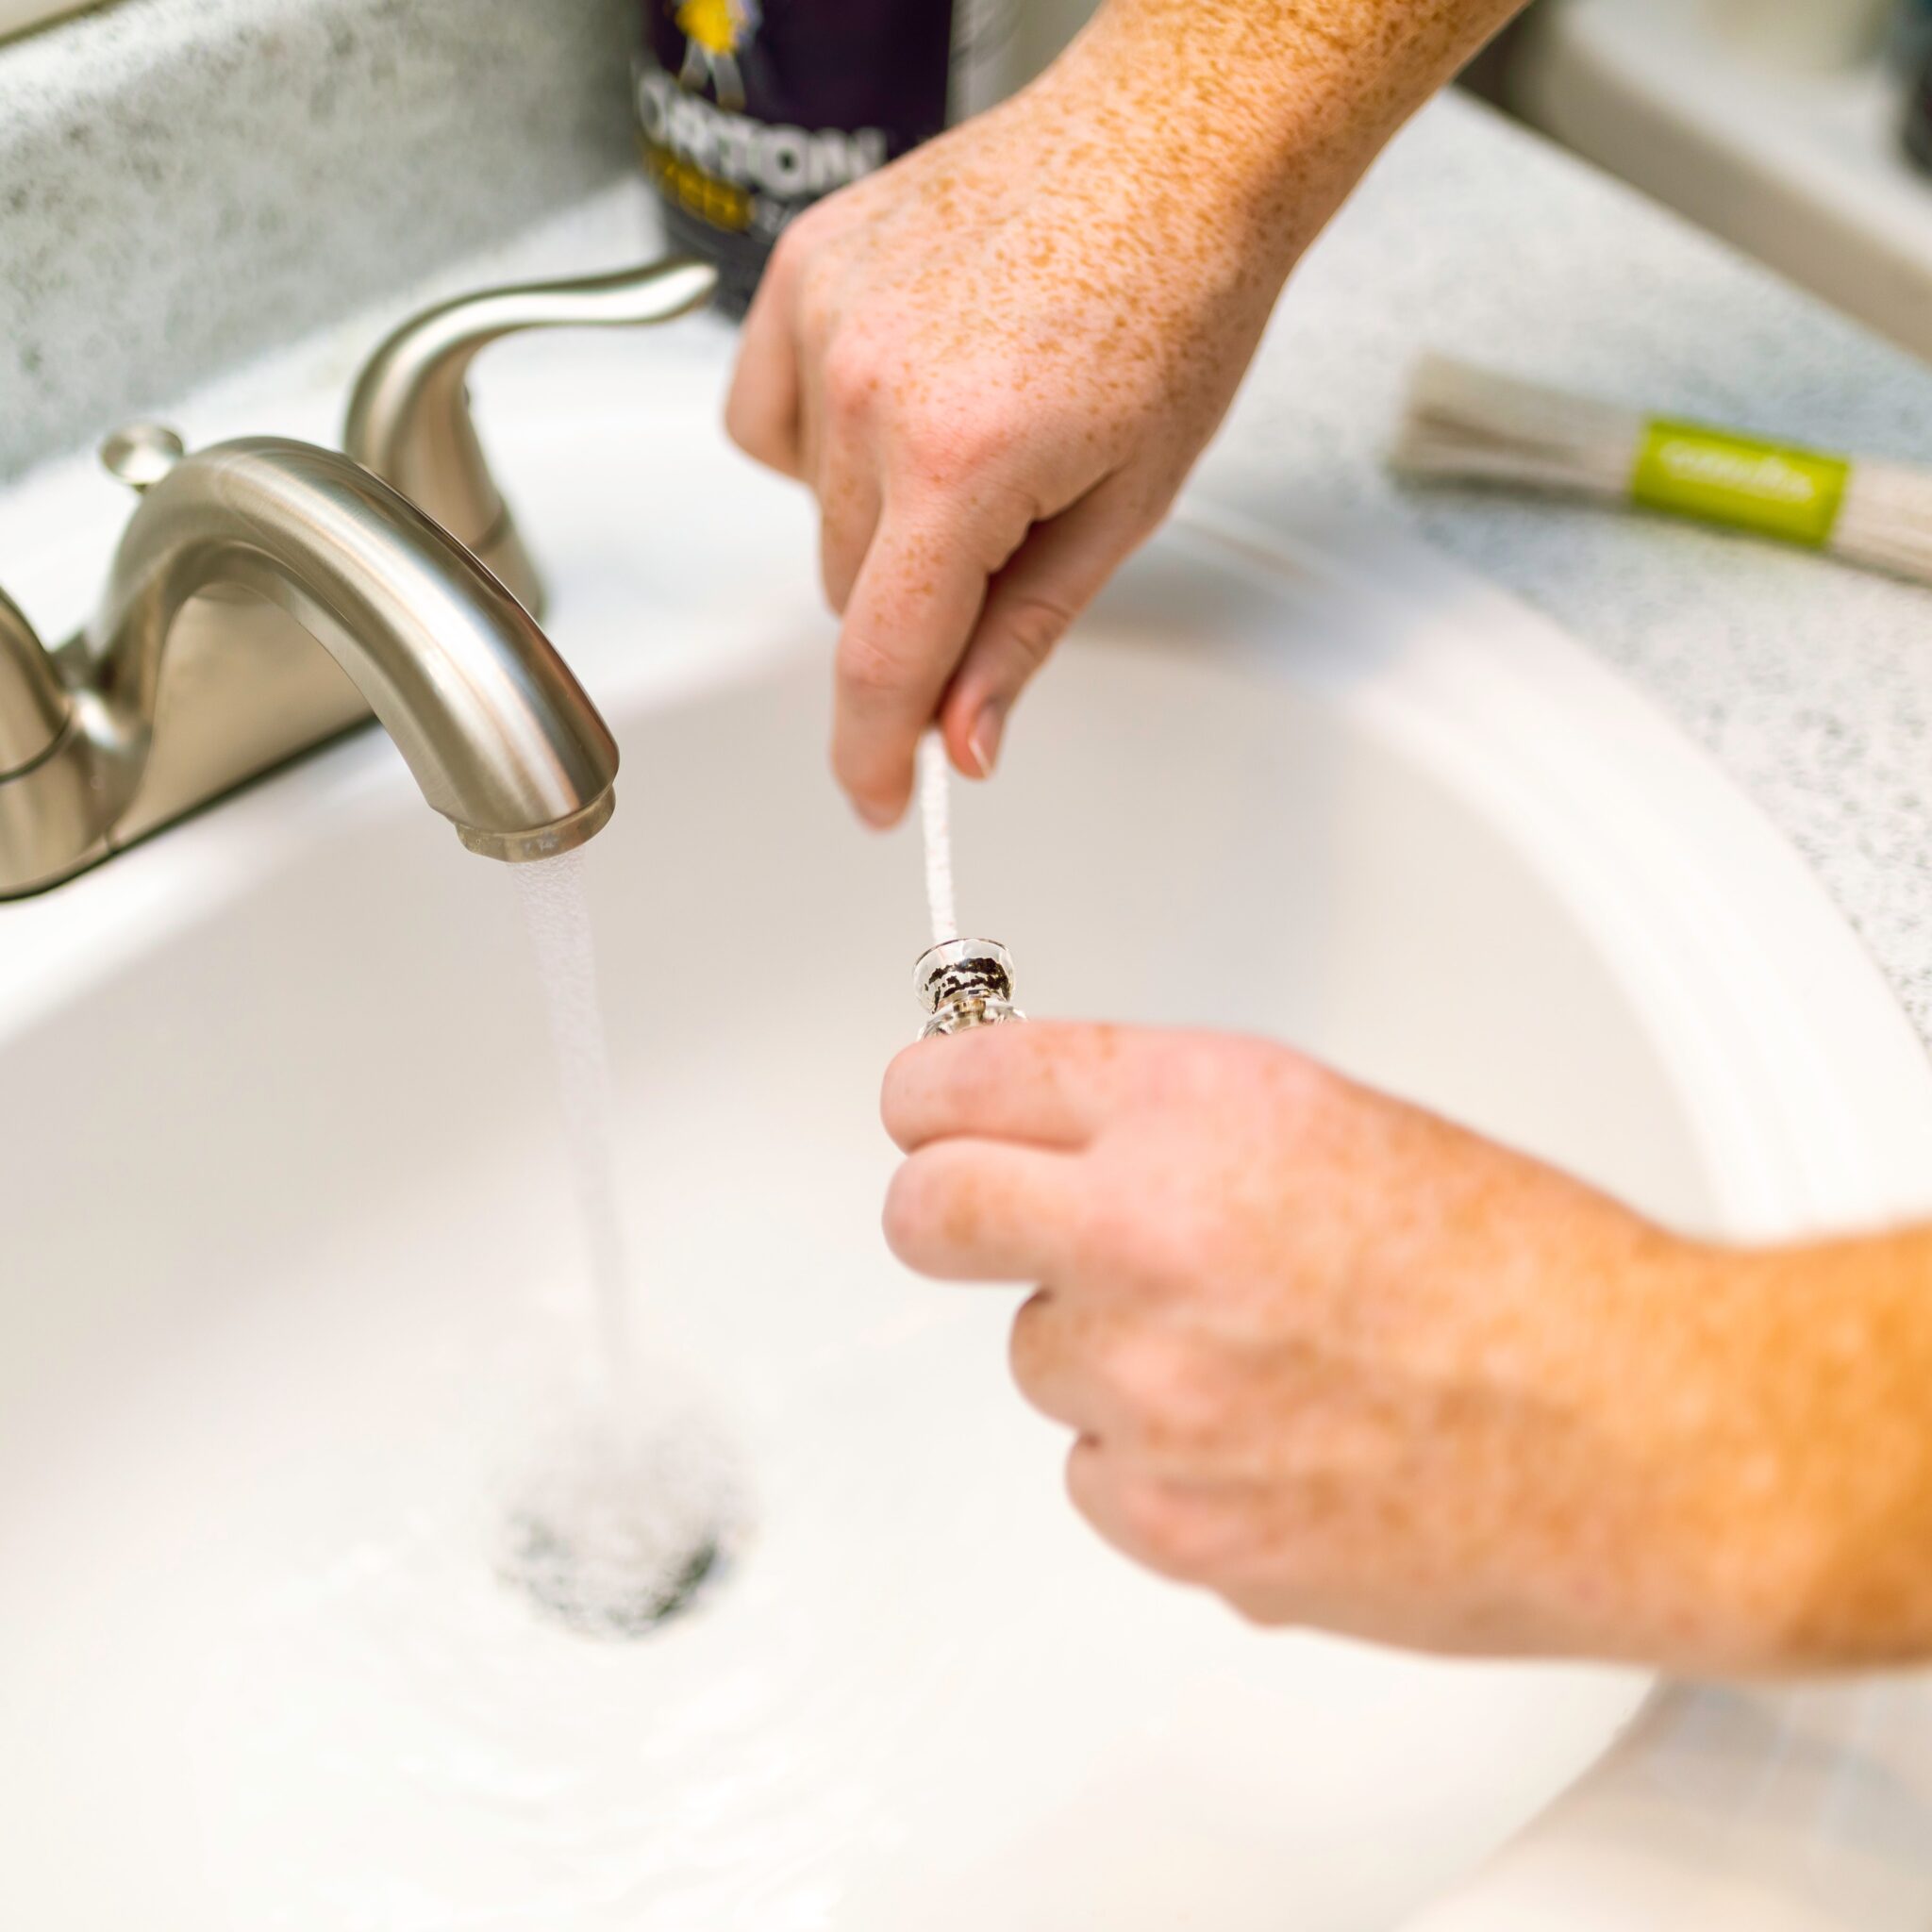 person cleaning a plumbing part in sink